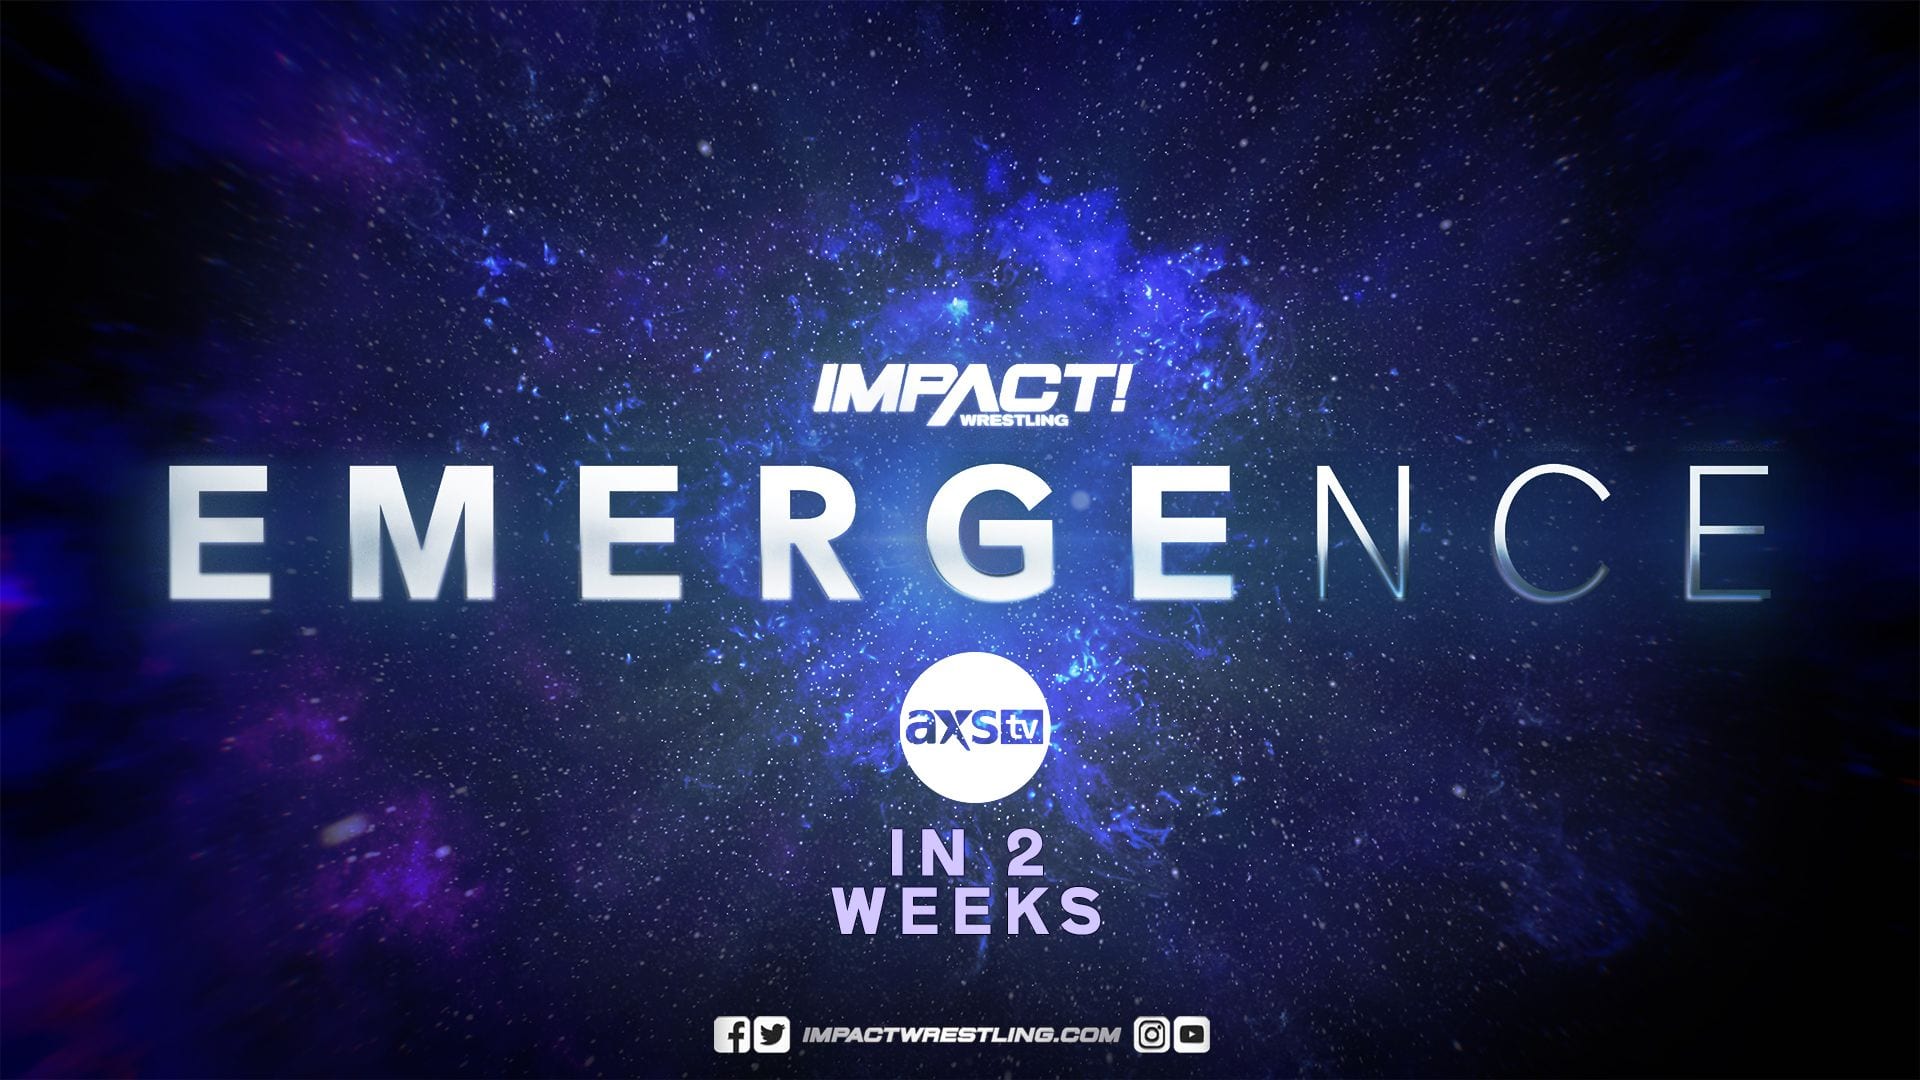 IMPACT Wrestling Announces New “Emergence” Special Event